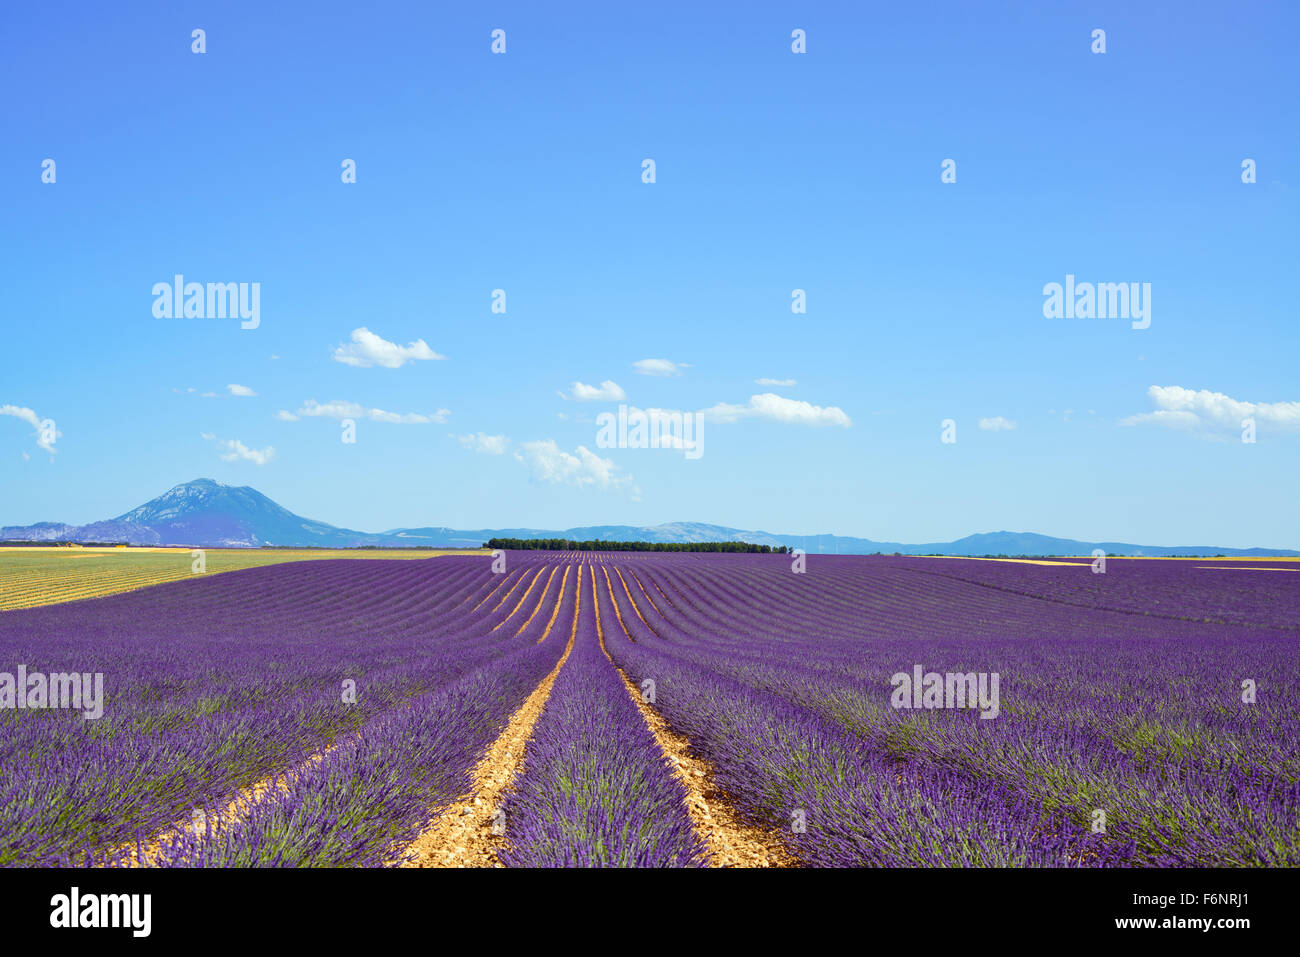 Lavender flower blooming scented fields in endless rows and trees on background. Landscape in Valensole plateau, Provence, Franc Stock Photo